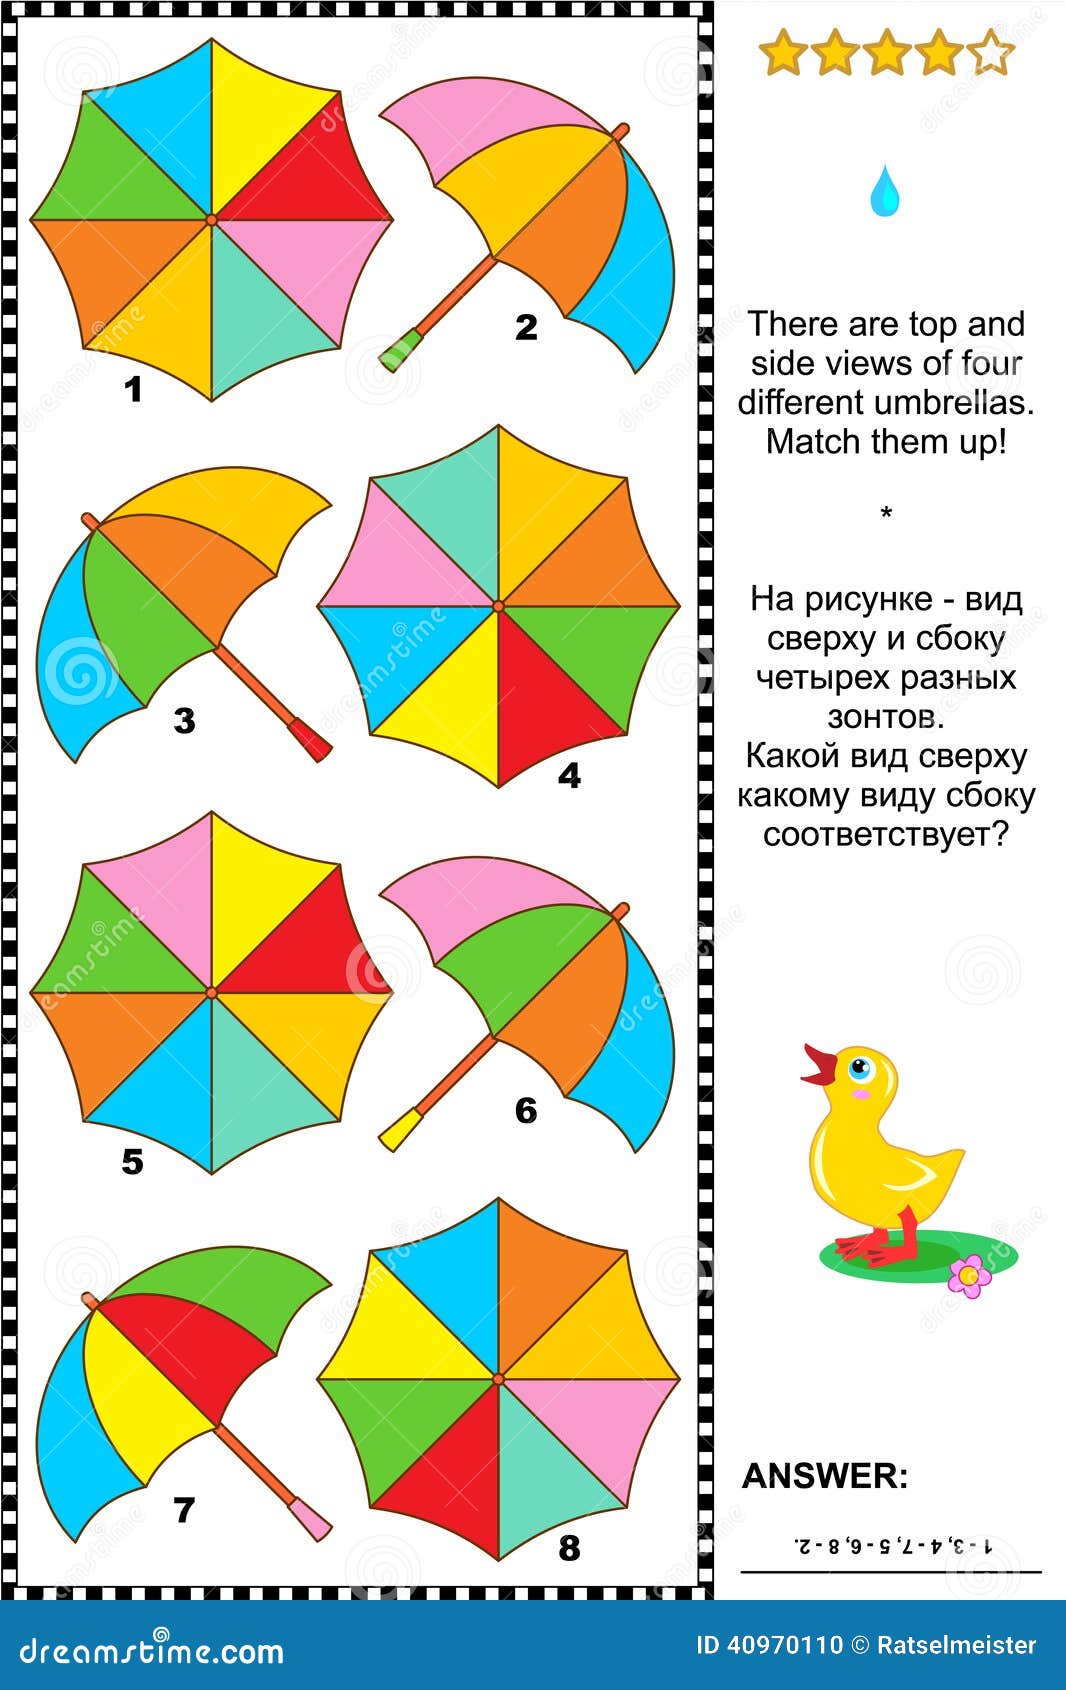 visual puzzle with top and side views of umbrellas